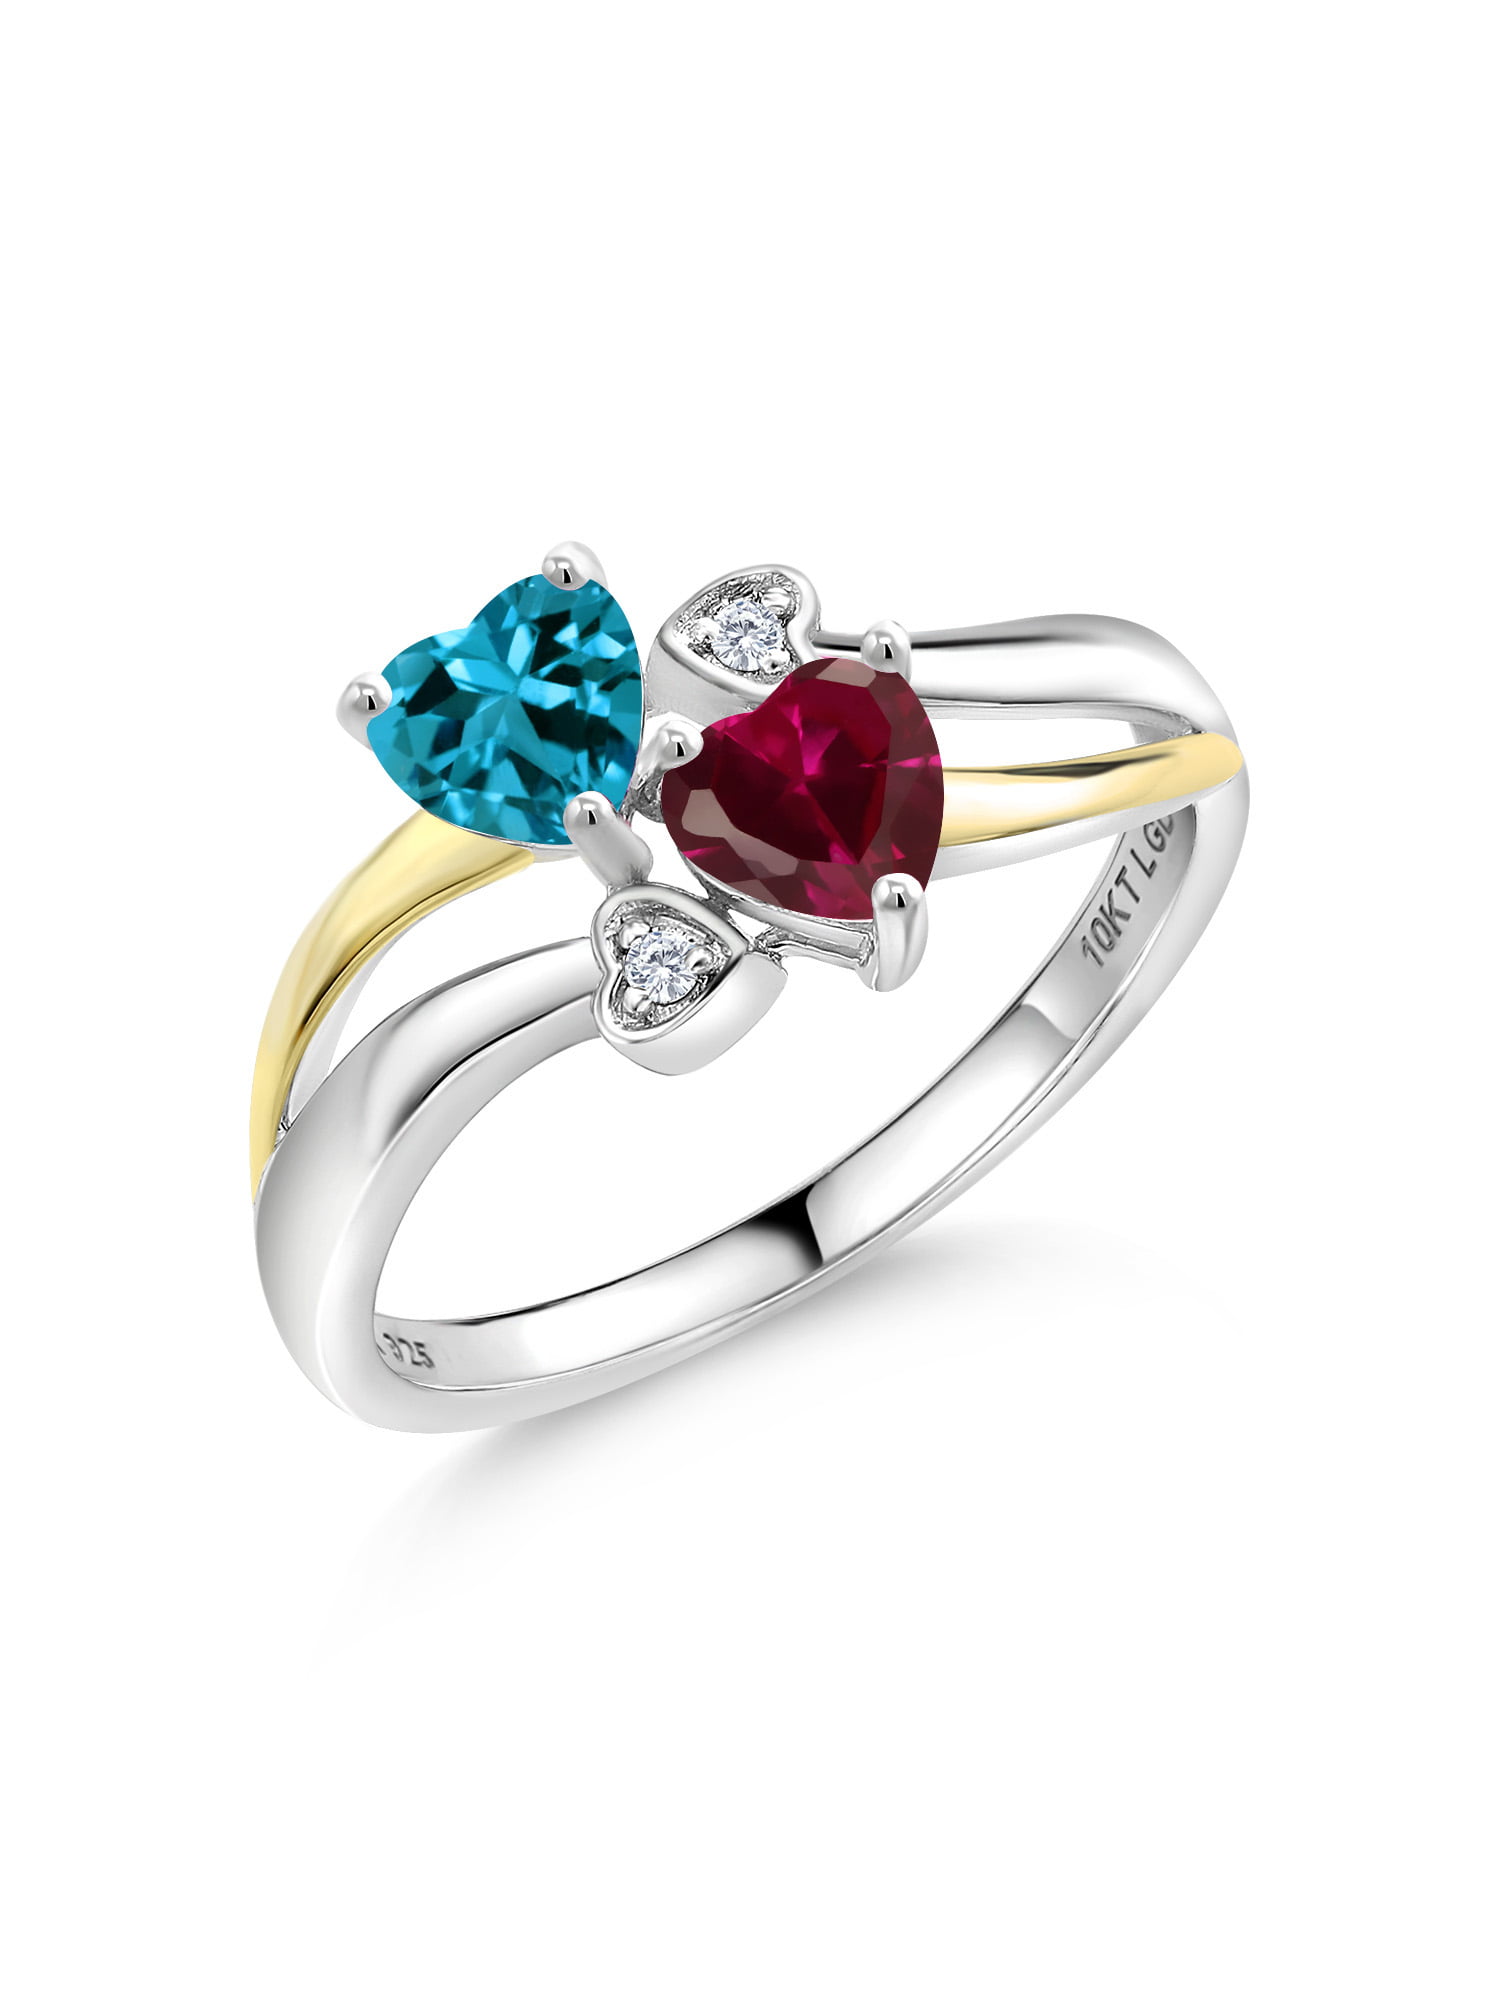 Gem Stone King 1.17 Ct London Blue Topaz Red Created Ruby 925 Silver and  10K Yellow Gold Lab Grown Diamond Ring with 4 Hearts